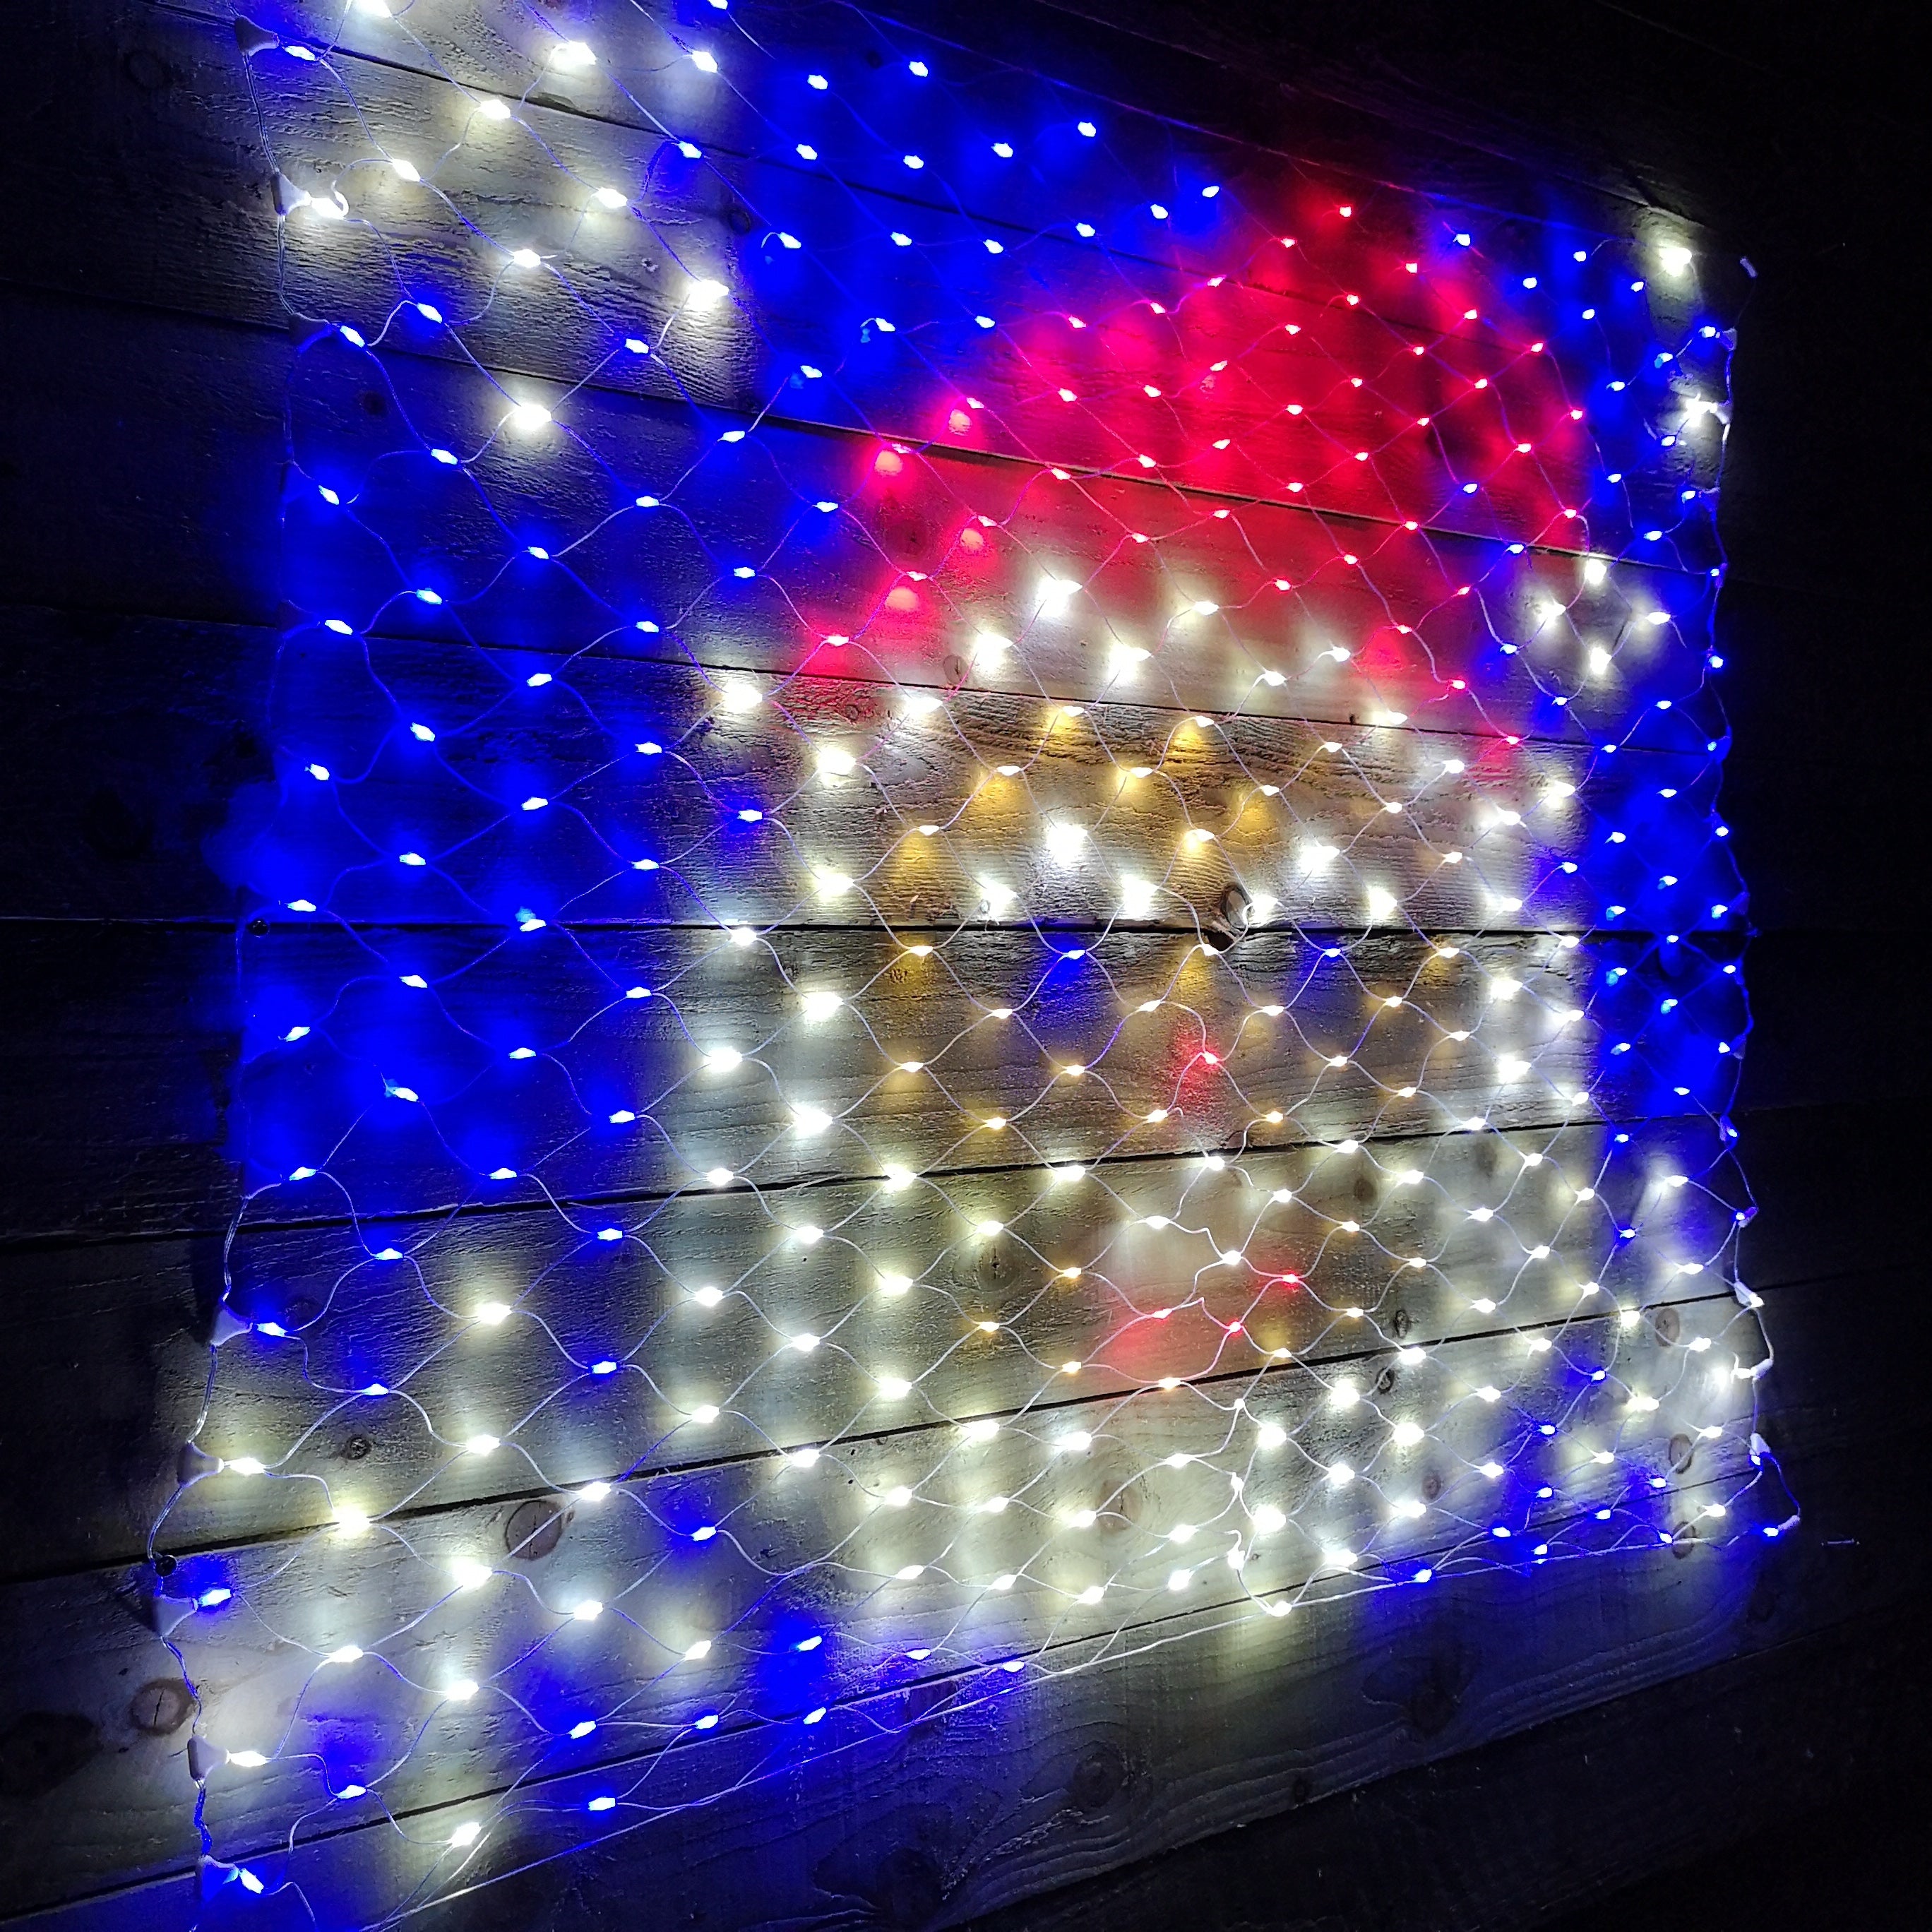 H1.2 x 1.3m Premier Indoor Outdoor Santa Father Christmas Net Light with 320 LED